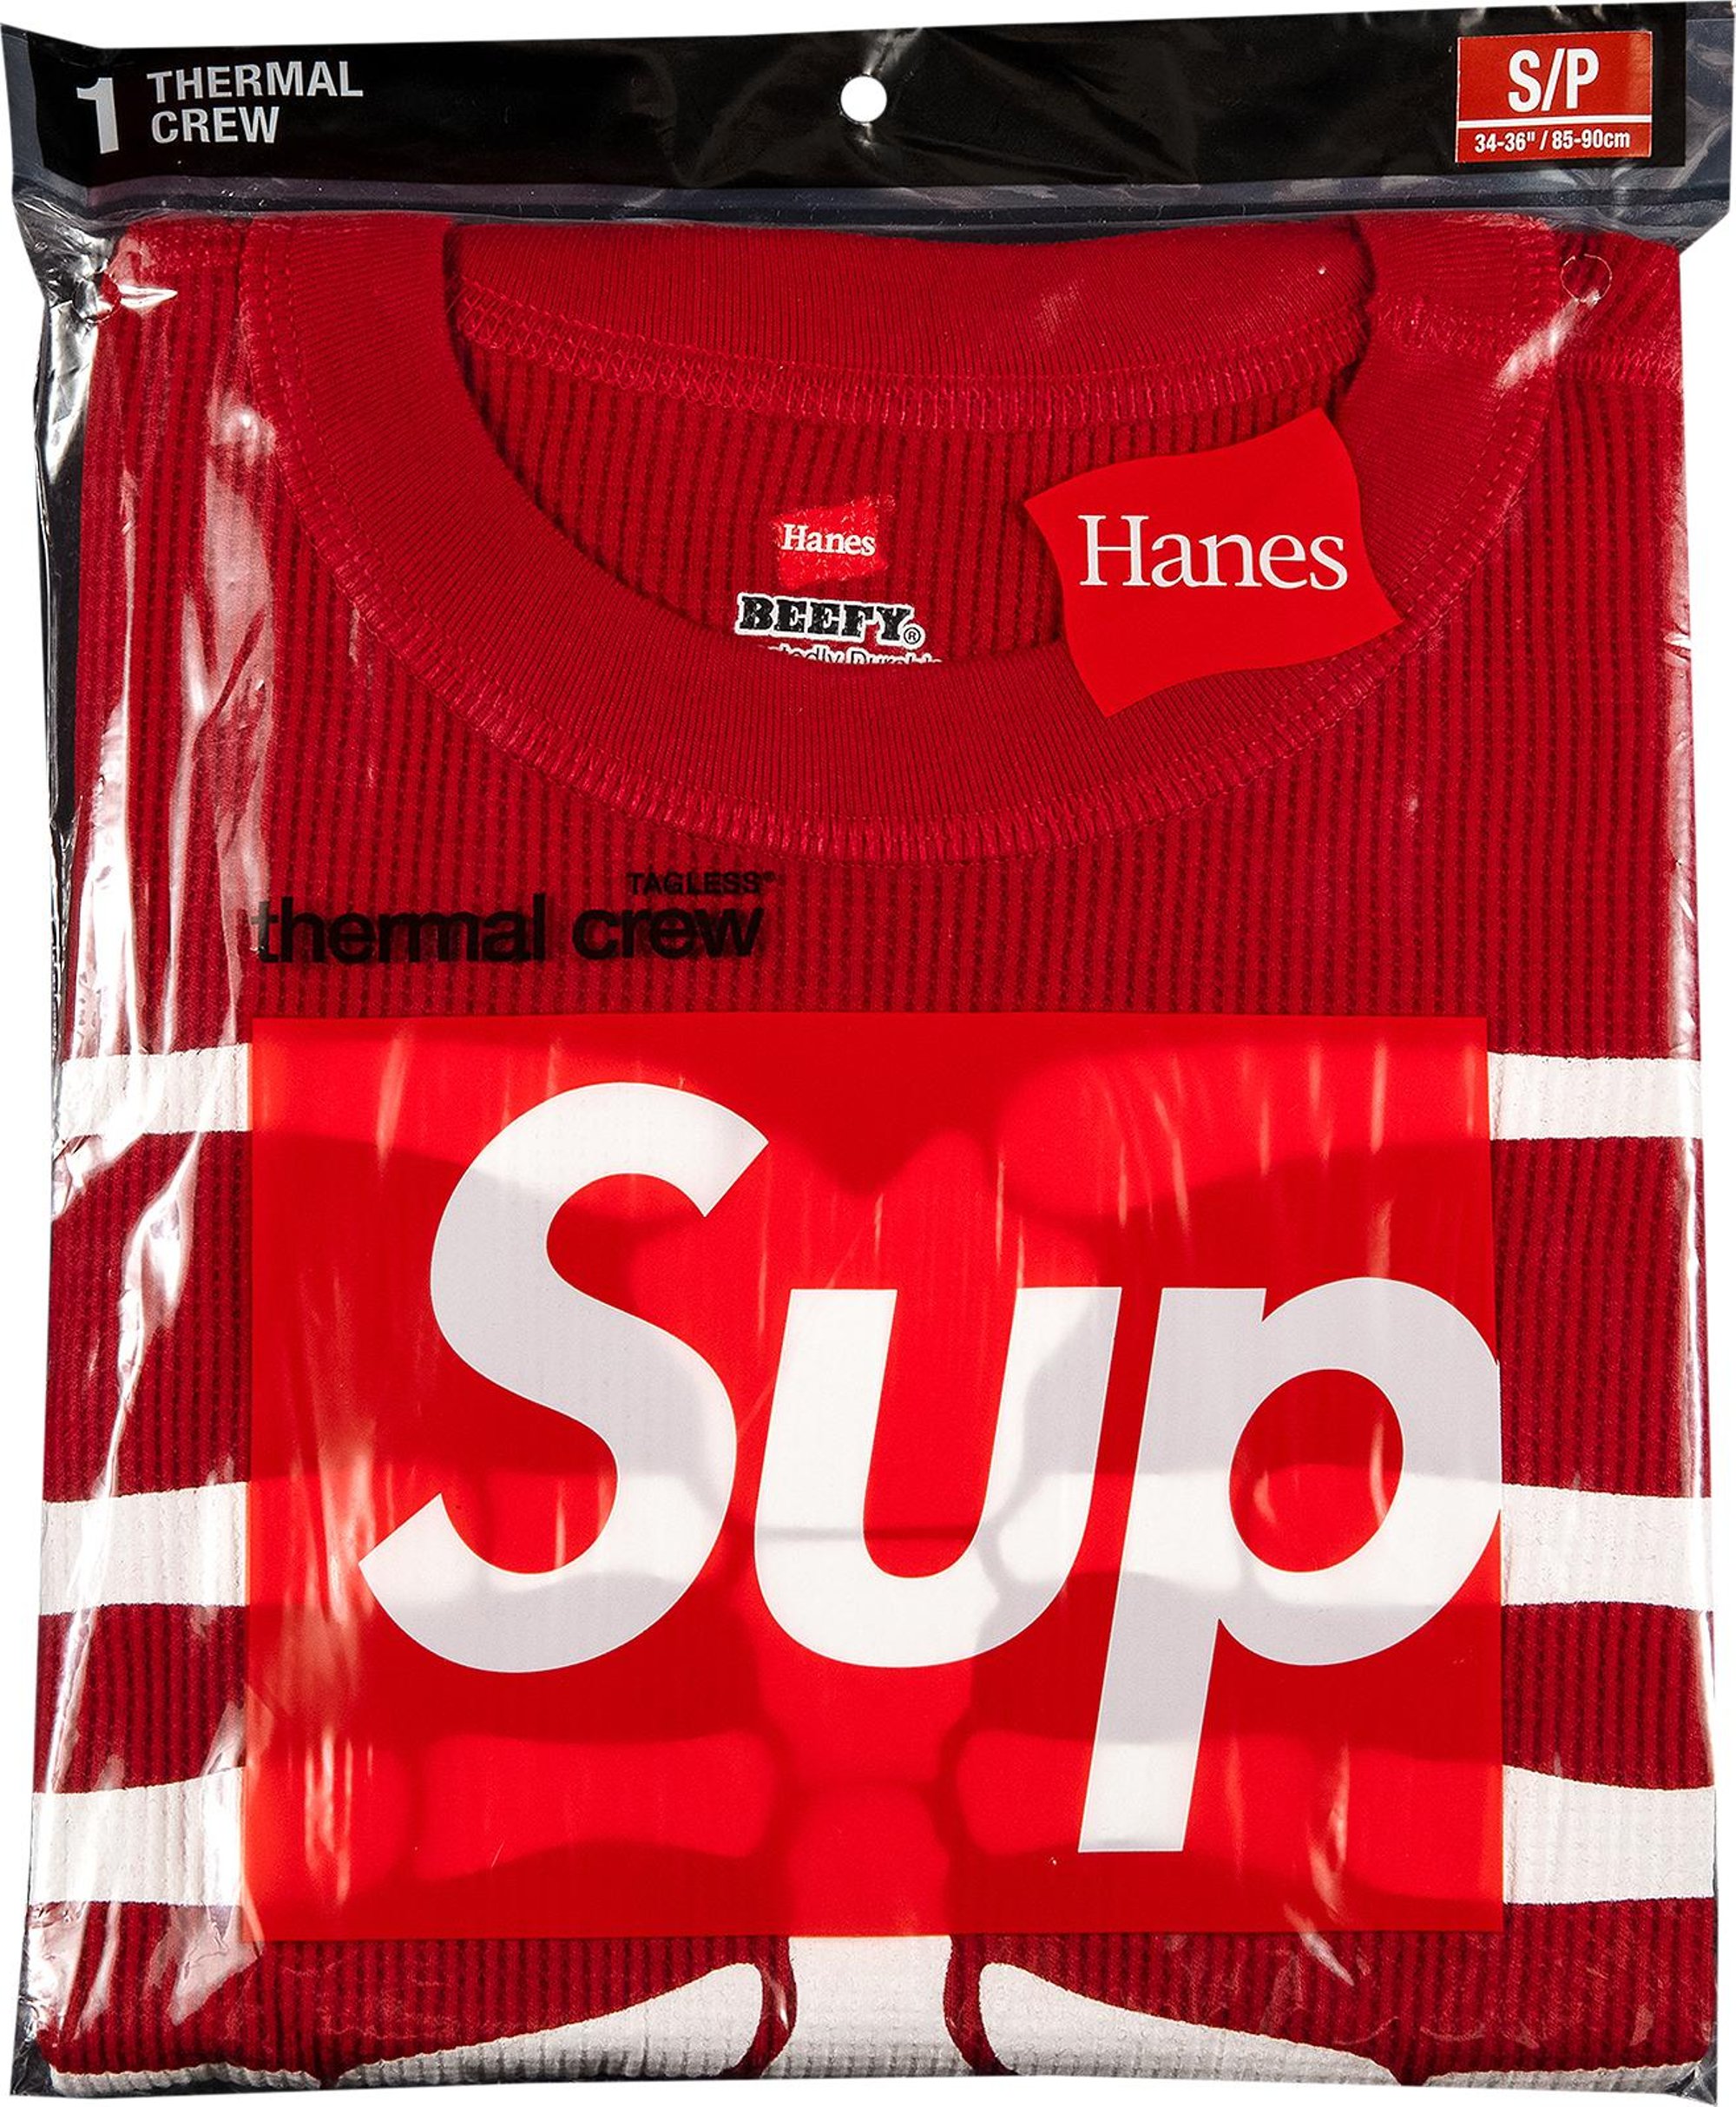 Buy Supreme x Hanes Bones Thermal Crew (1 Pack) 'Red' - FW21A22 RED | GOAT